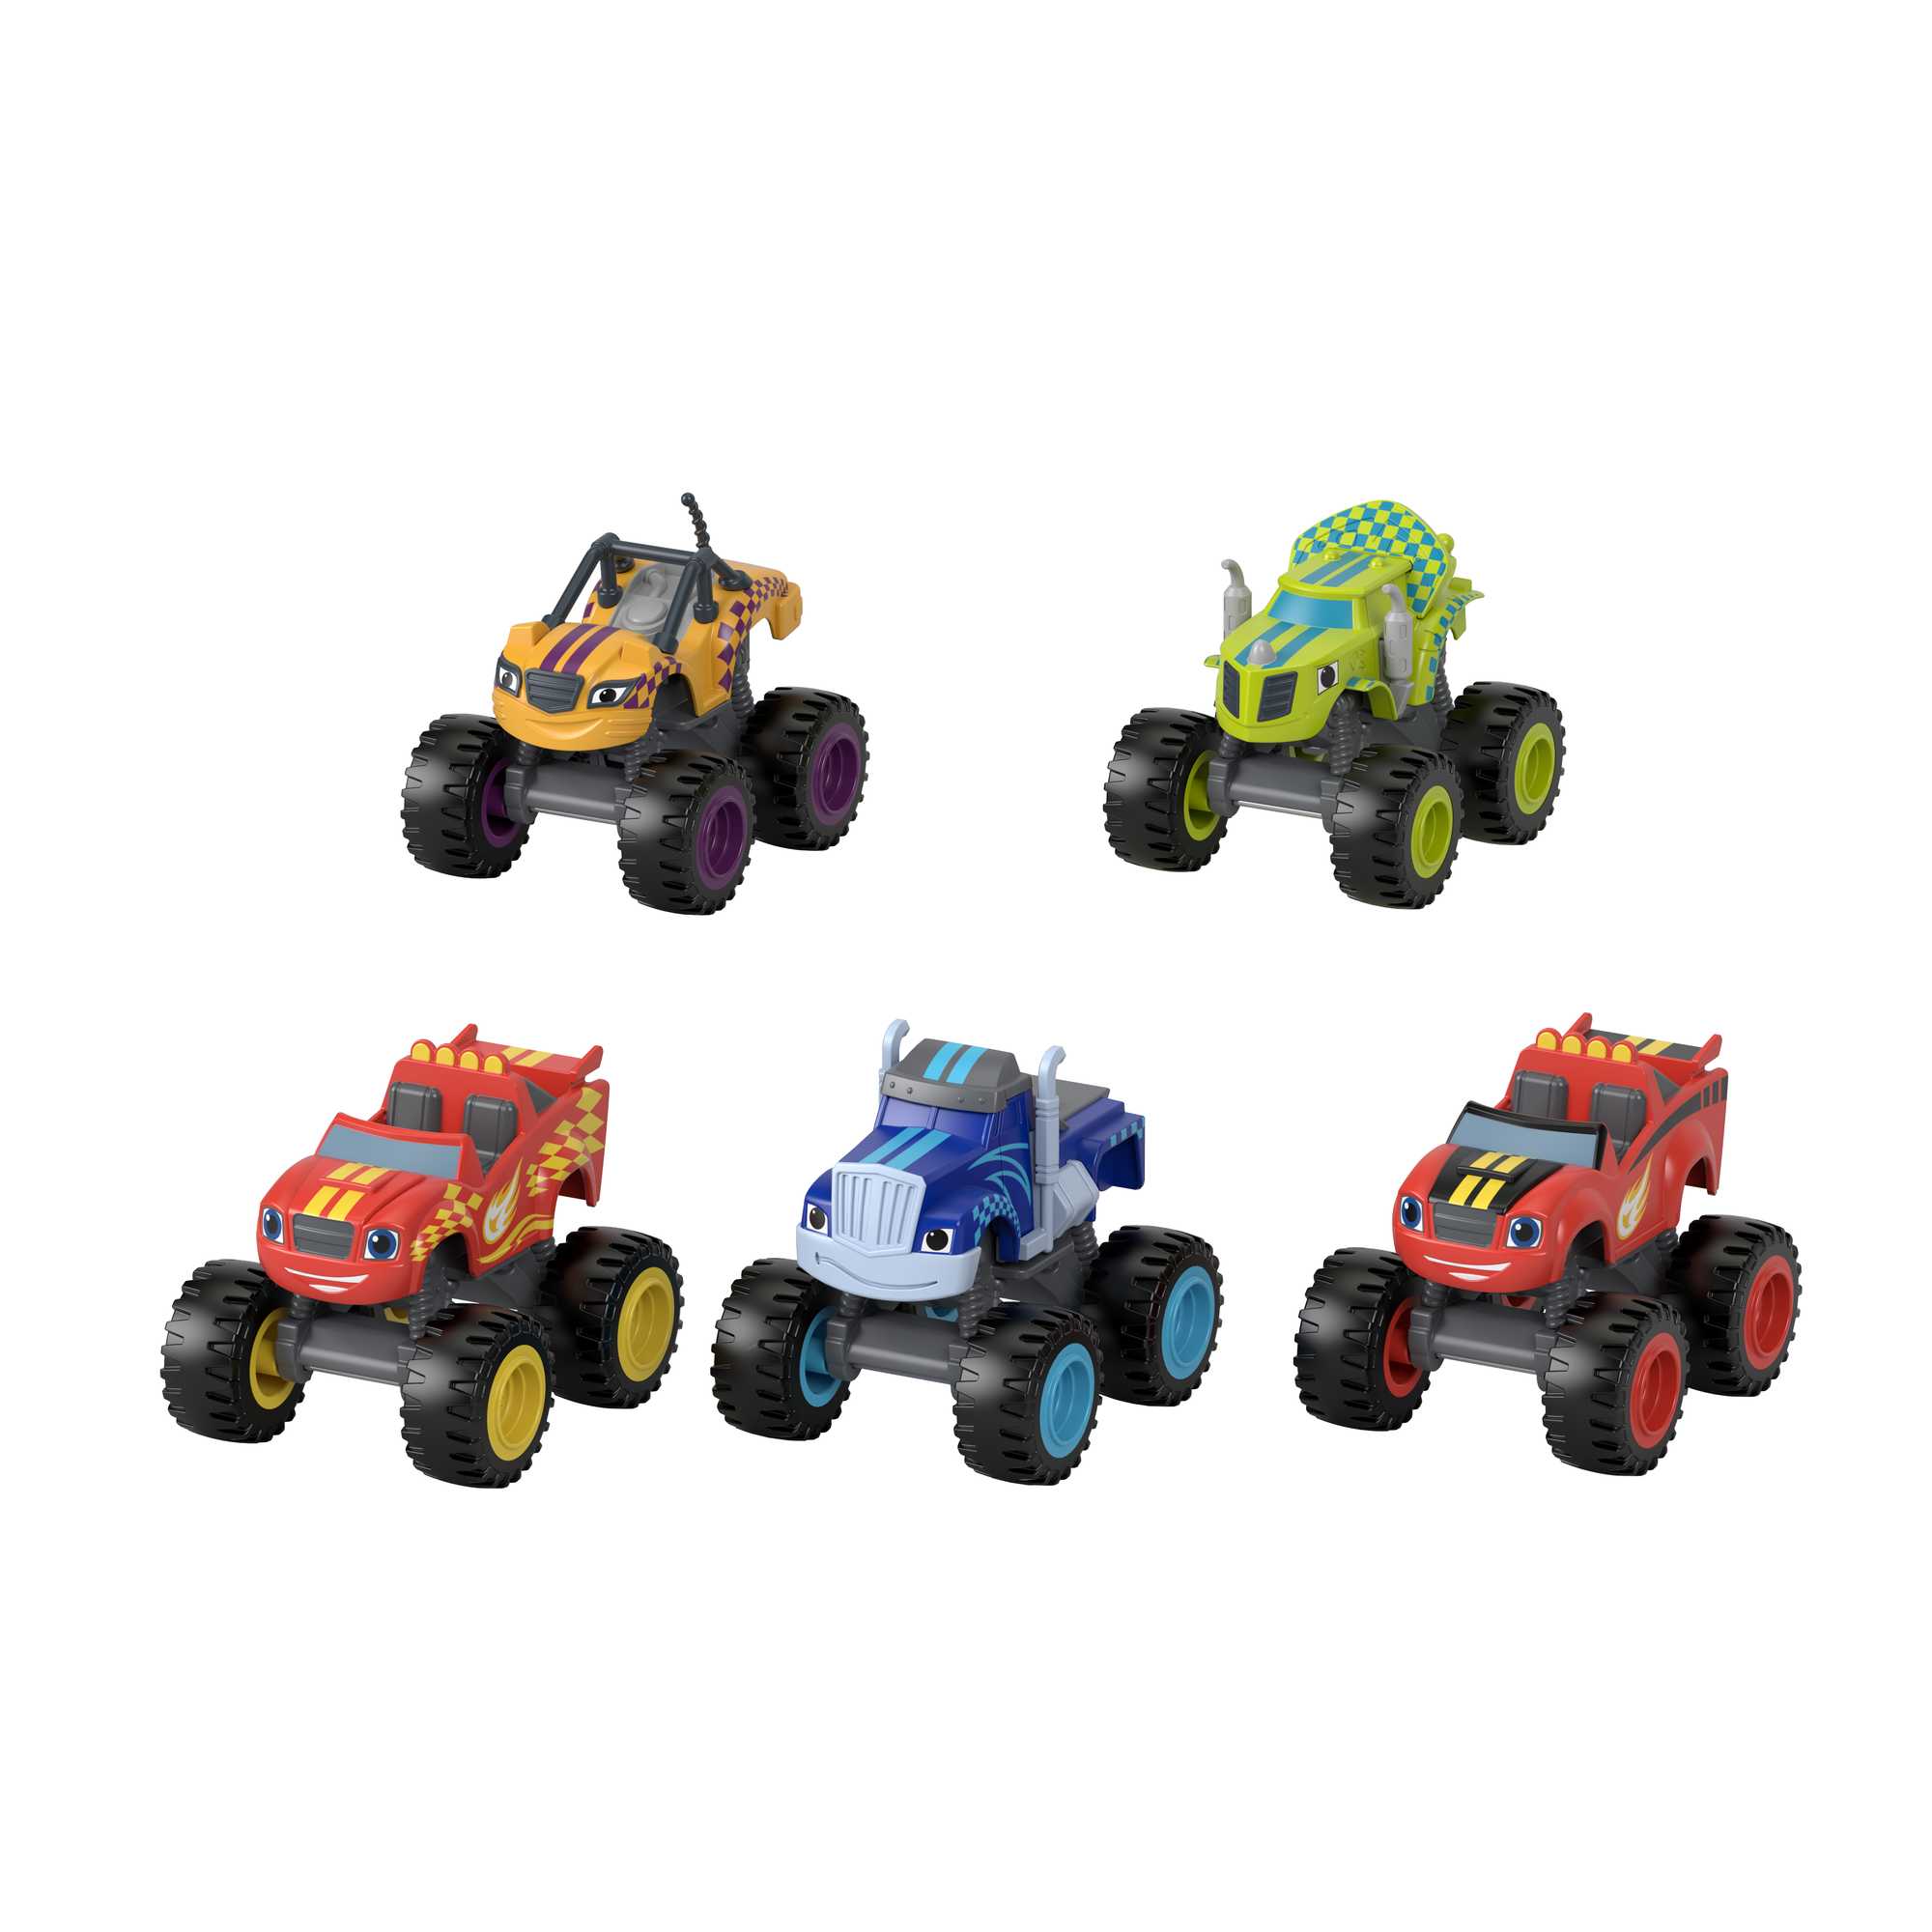 Fisher-Price Blaze and The Monster Machines Racers 4 Pack, Set of die-cast  Metal Push-Along Vehicles for Preschool Kids Ages 3 Years and Older 